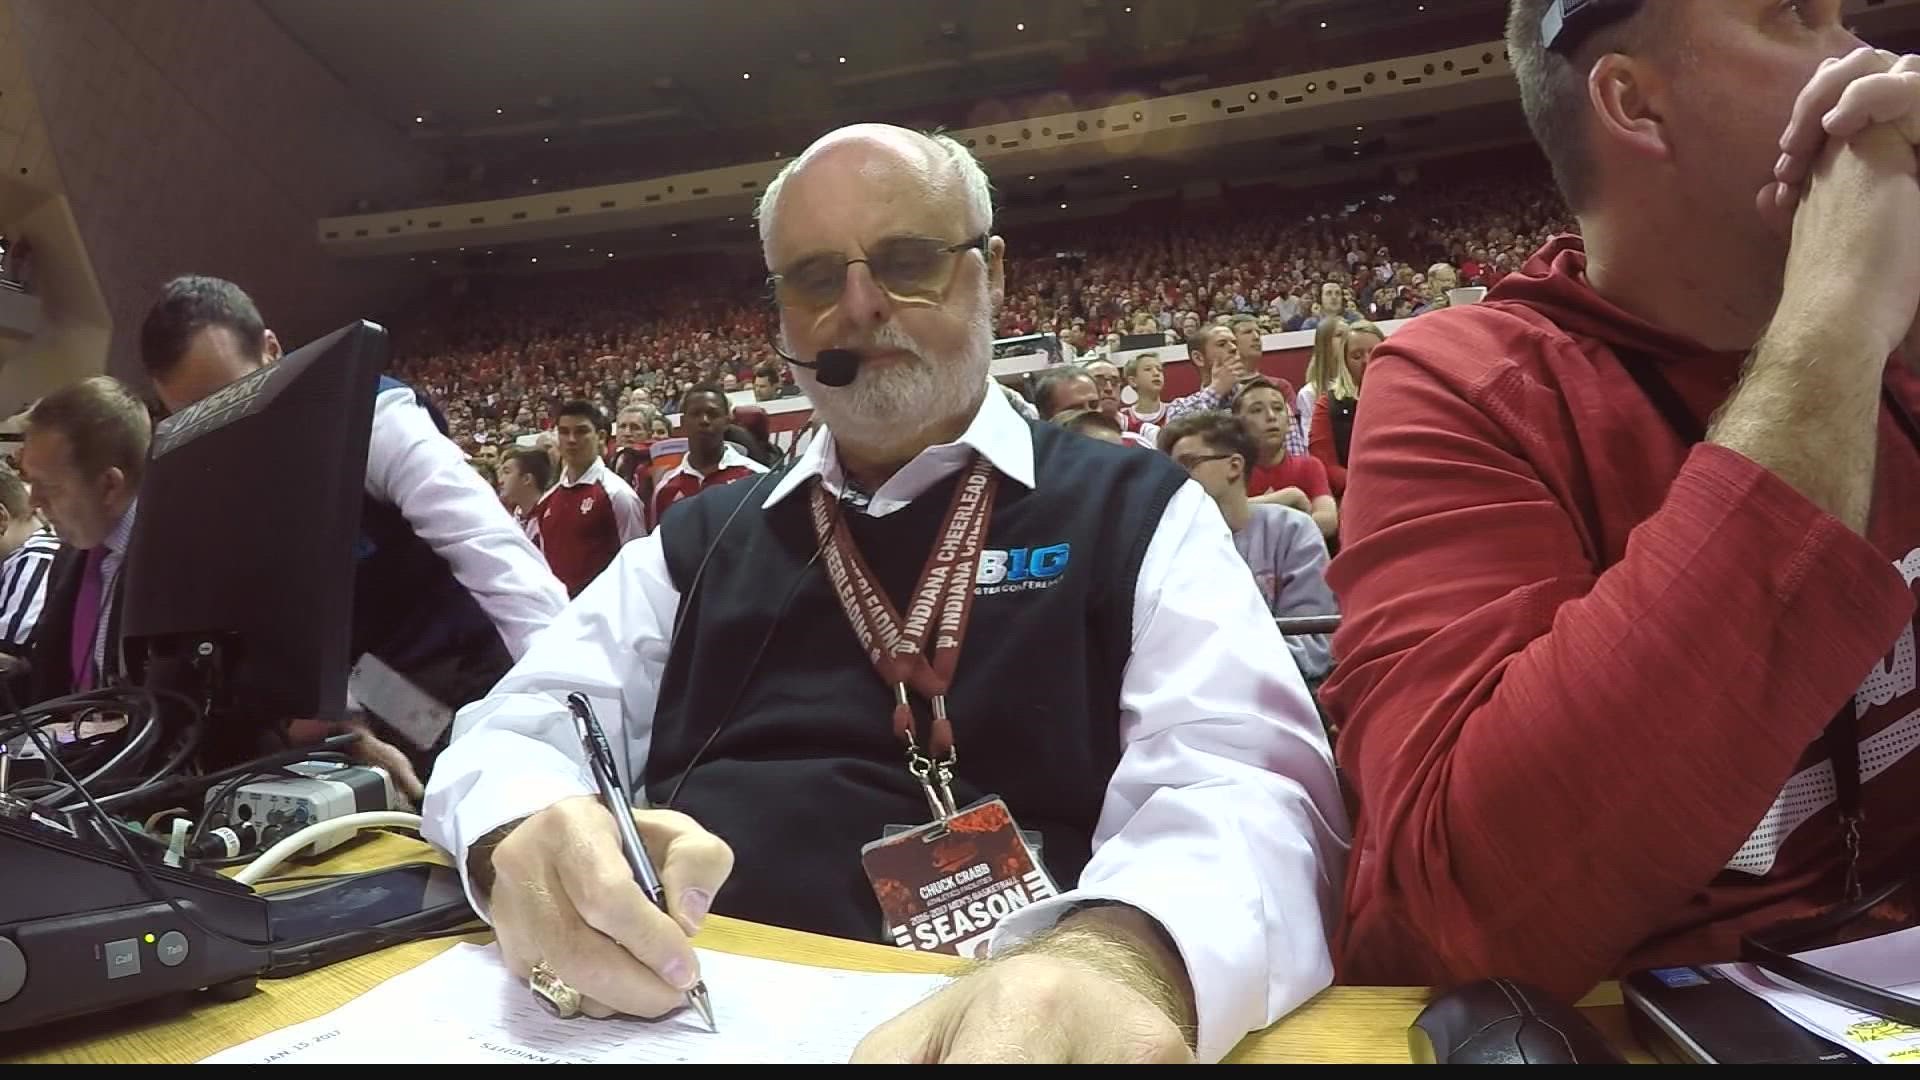 Chuck Crabb has been the public address announcer for Indiana University basketball games since 1977.